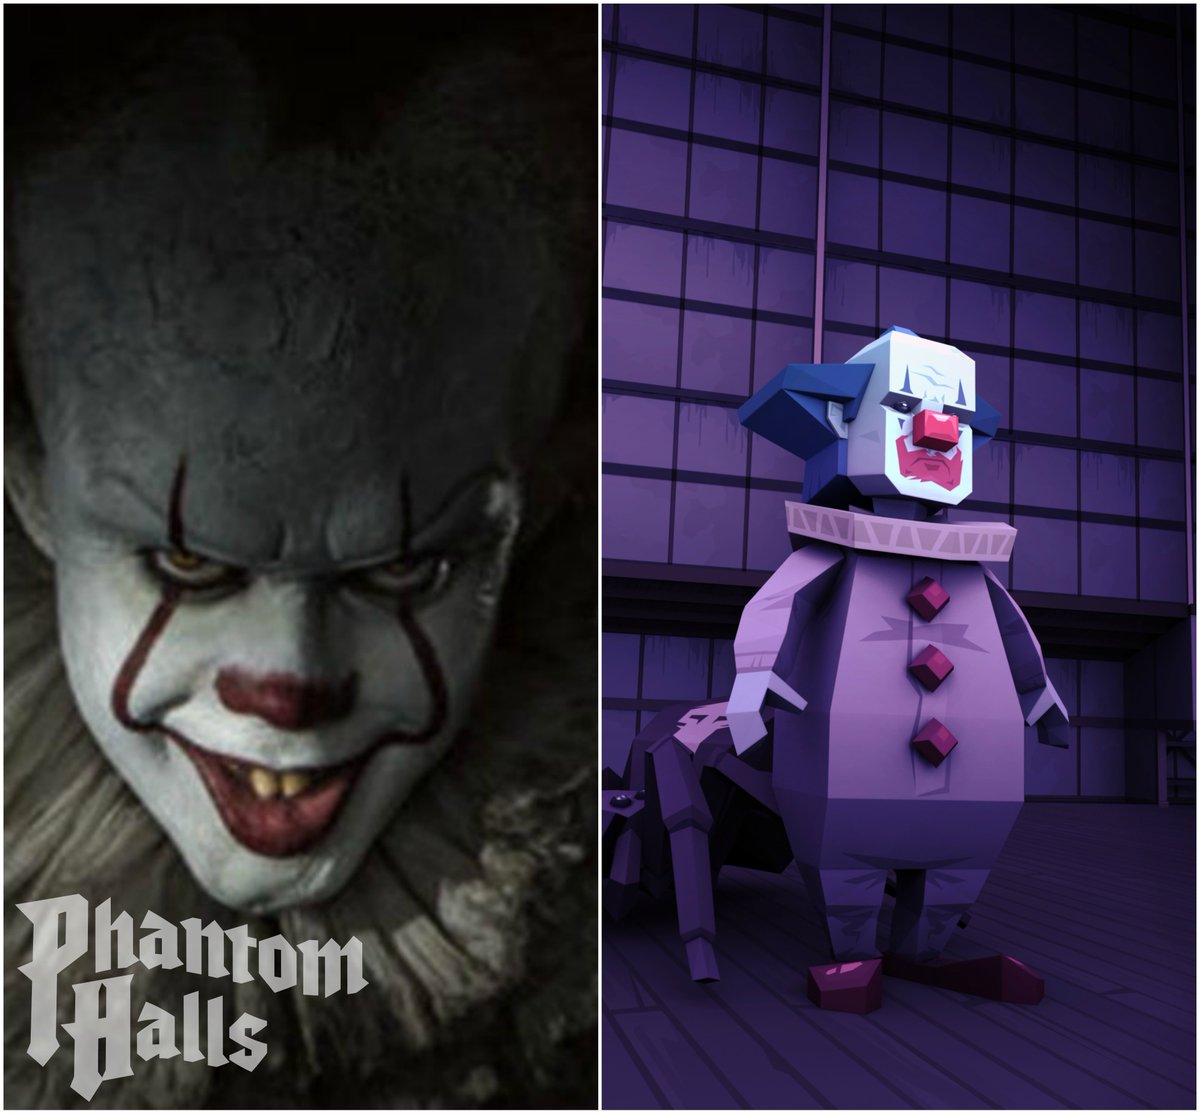 Who wore it better? @ITMovieOfficial. Is there anything more scary than a killer clown? Unfortunately for #PhantomHalls, we have more than one! #creepyclowns #horrorgame #indiegames #TuesdayThoughts #indiegaming #indiedev 

#Kickstarter: kck.st/2DmwwEe